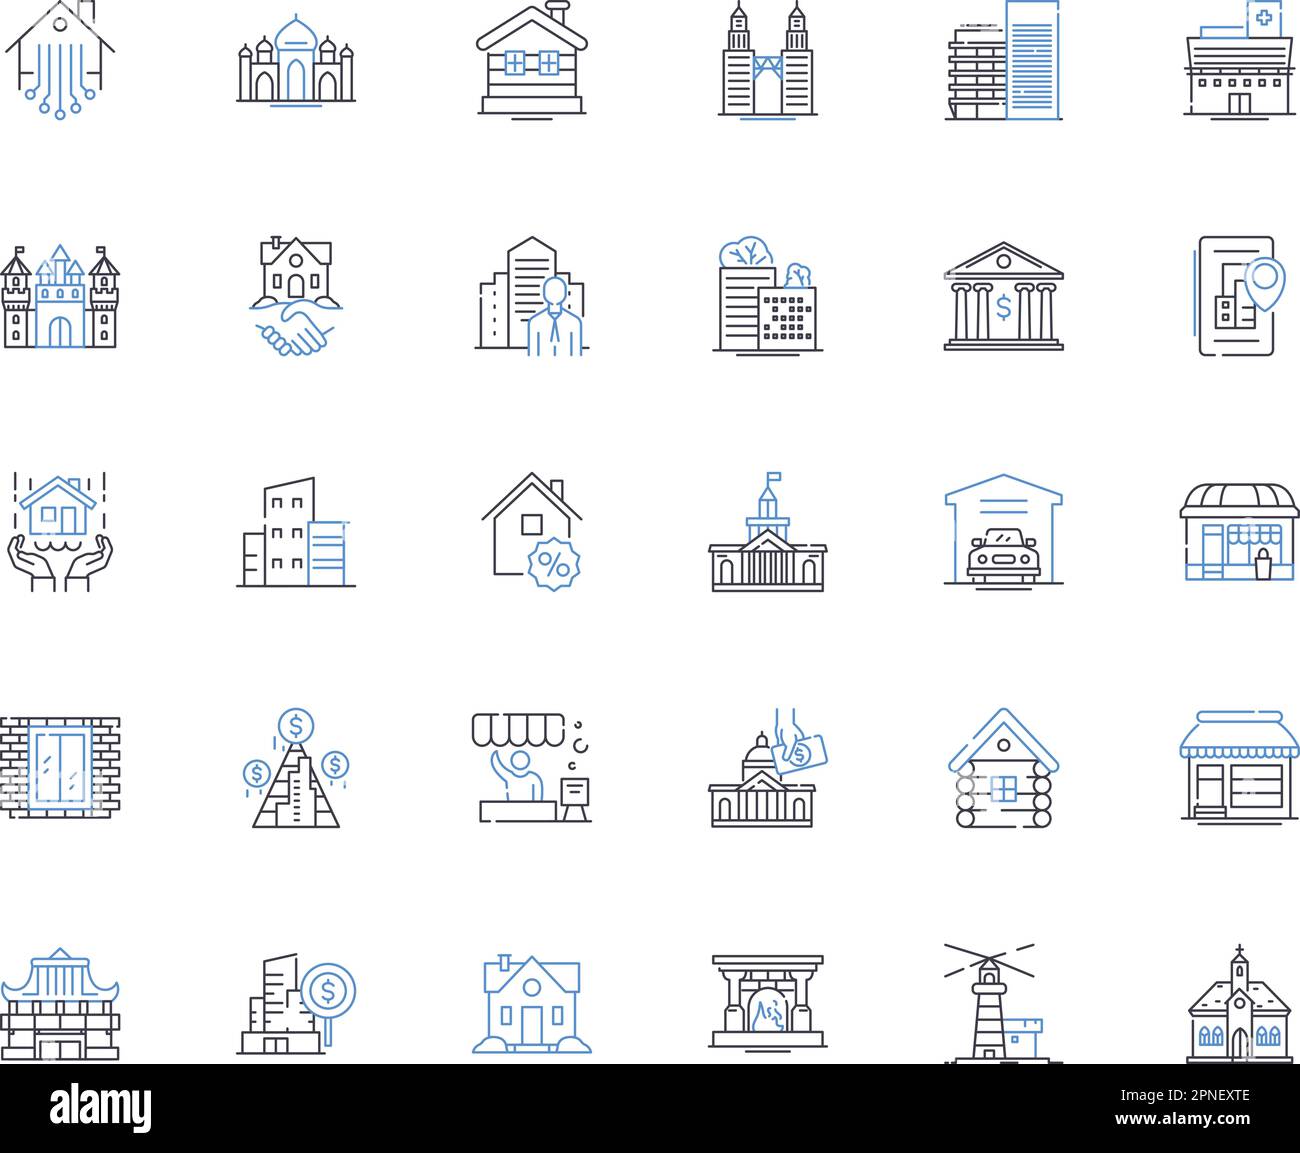 Land purchase line icons collection. Property, Acreage, Investment, Development, Landscaping, Natural, Rural vector and linear illustration. Urban Stock Vector